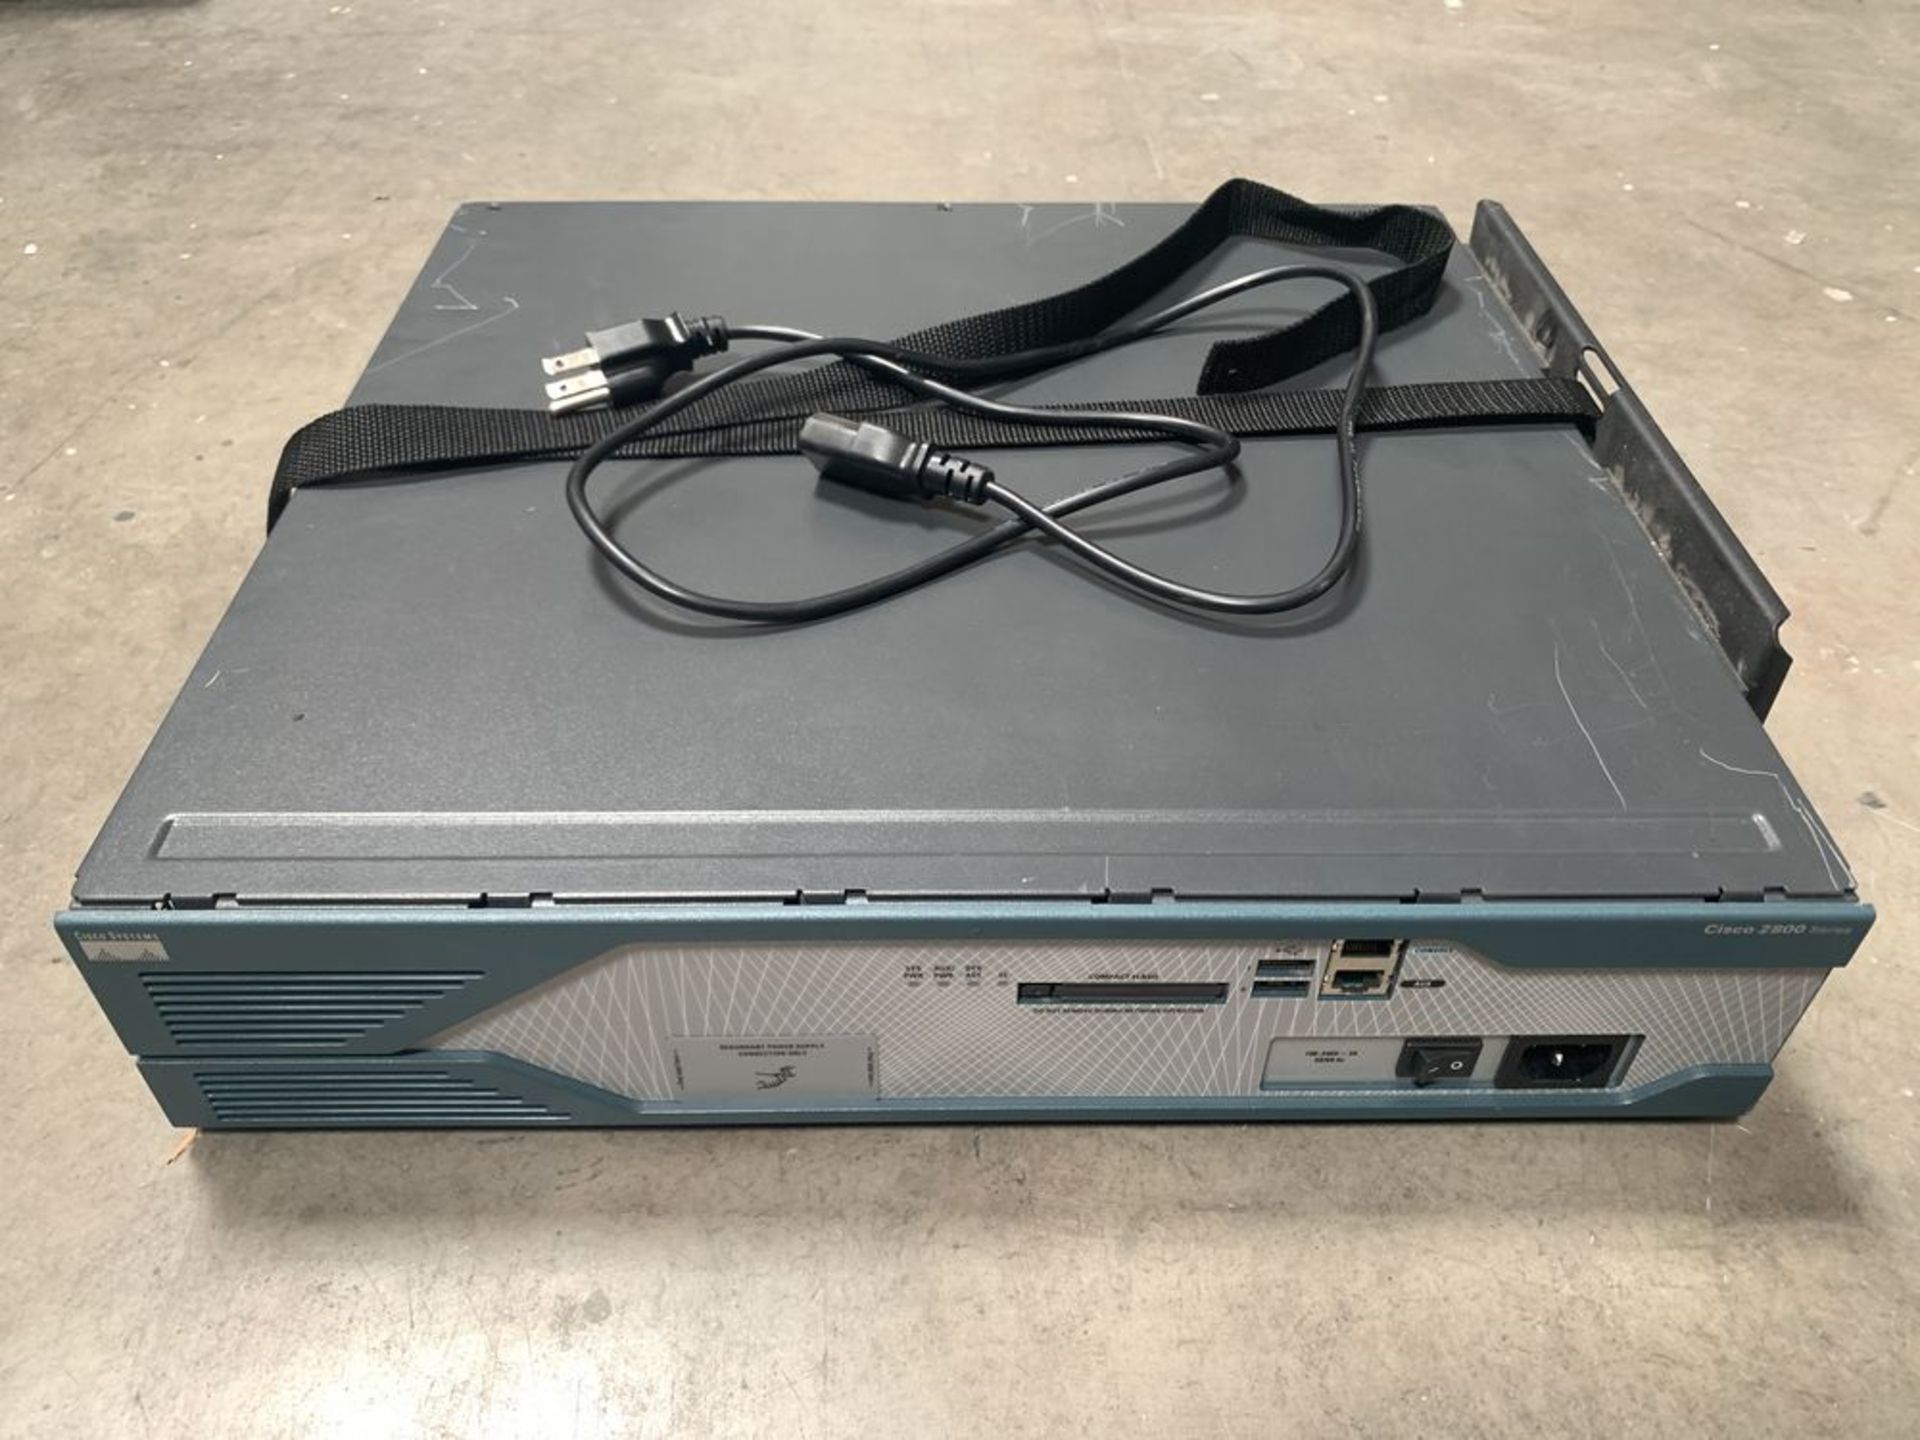 Cisco 2800 Series 2821 Integrated Services Router with Power Cable & StandWorking when last used